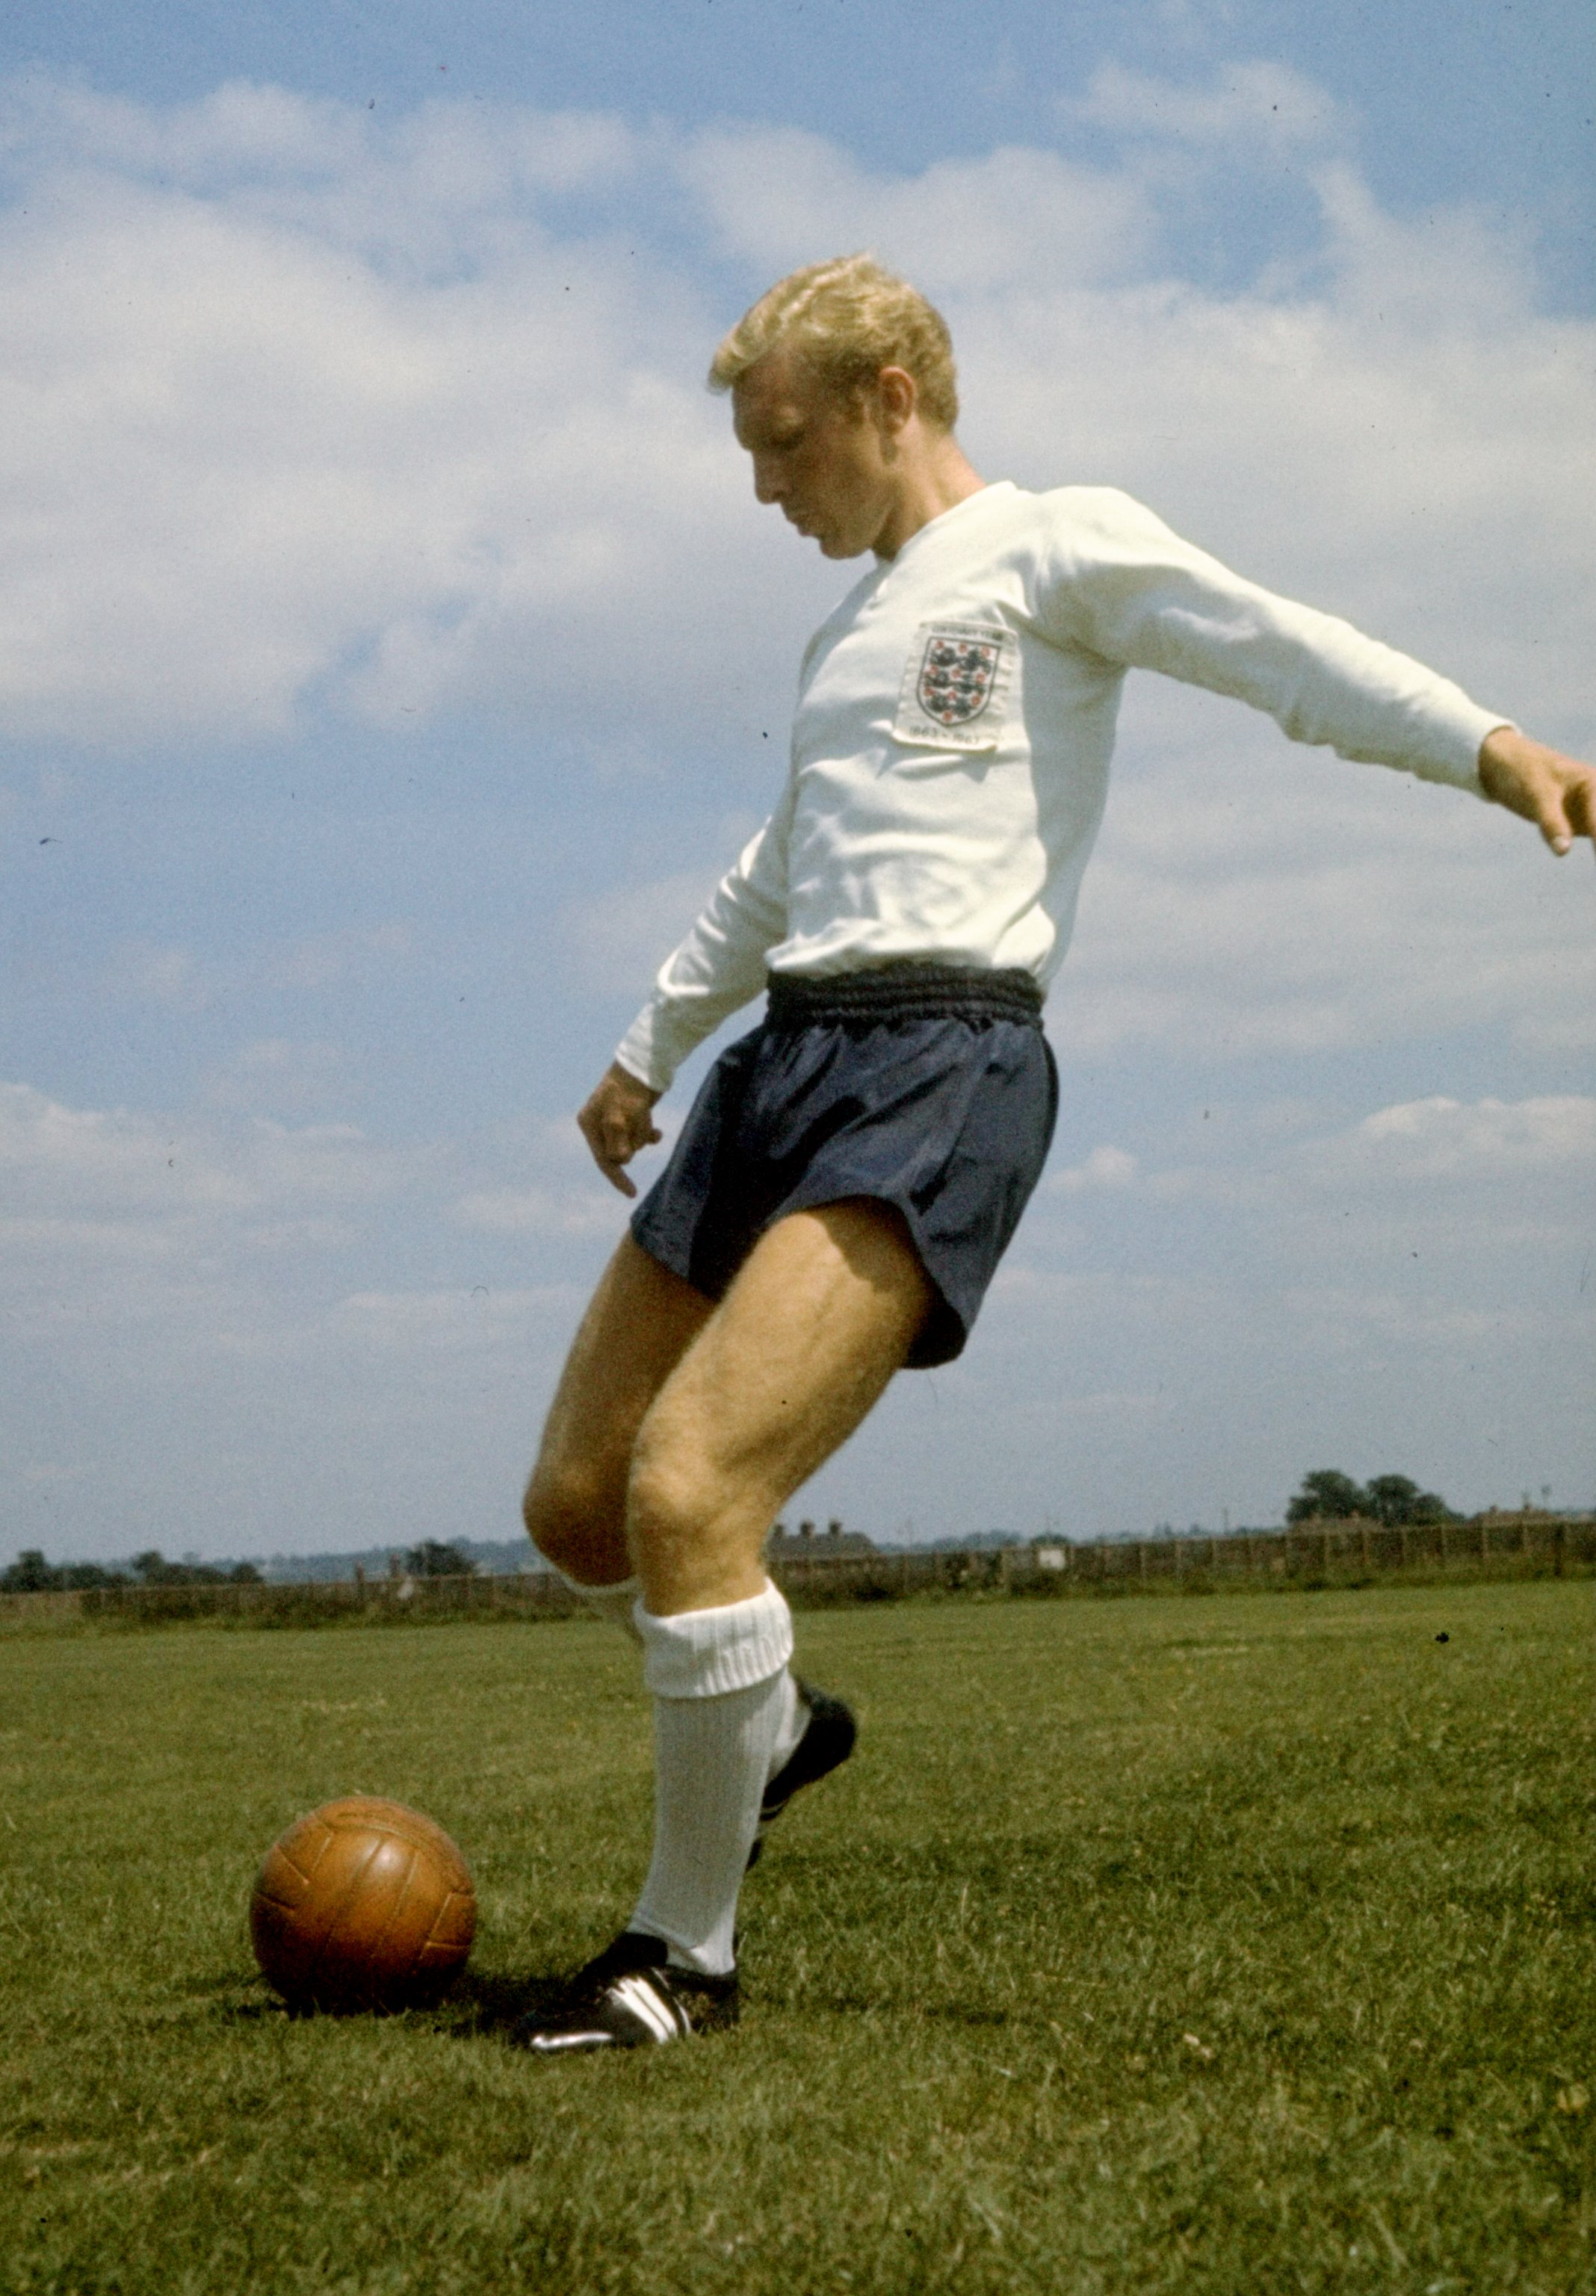 England's World Cup winning captain, the late Bobby Moore